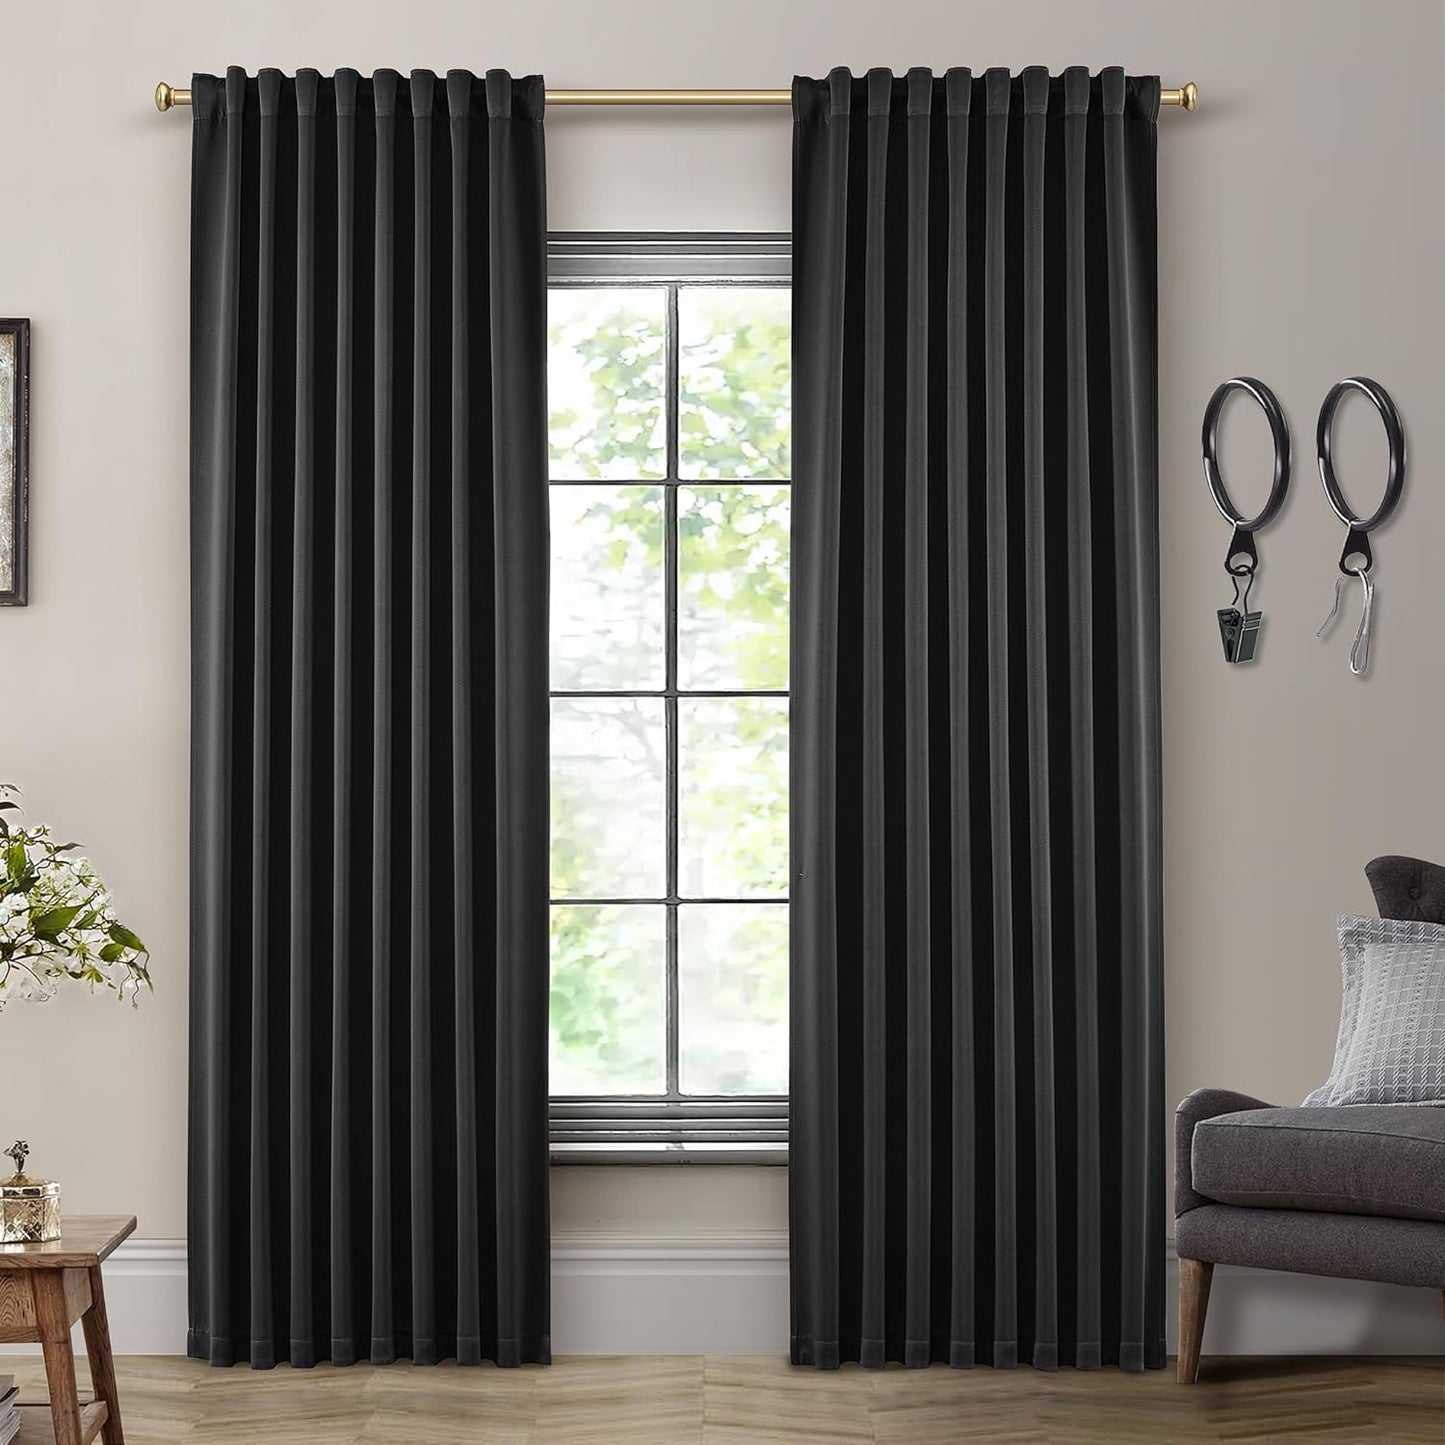 SHINELAND Beige Room Darkening Curtains 105 Inches Long for Living Room Bedroom,Cortinas Para Cuarto Bloqueador De Luz,Thermal Insulated Back Tab Pleat Blackout Curtains for Sunroom Patio Door Indoor  SHINELAND Black 2X(52"Wx96"L) 